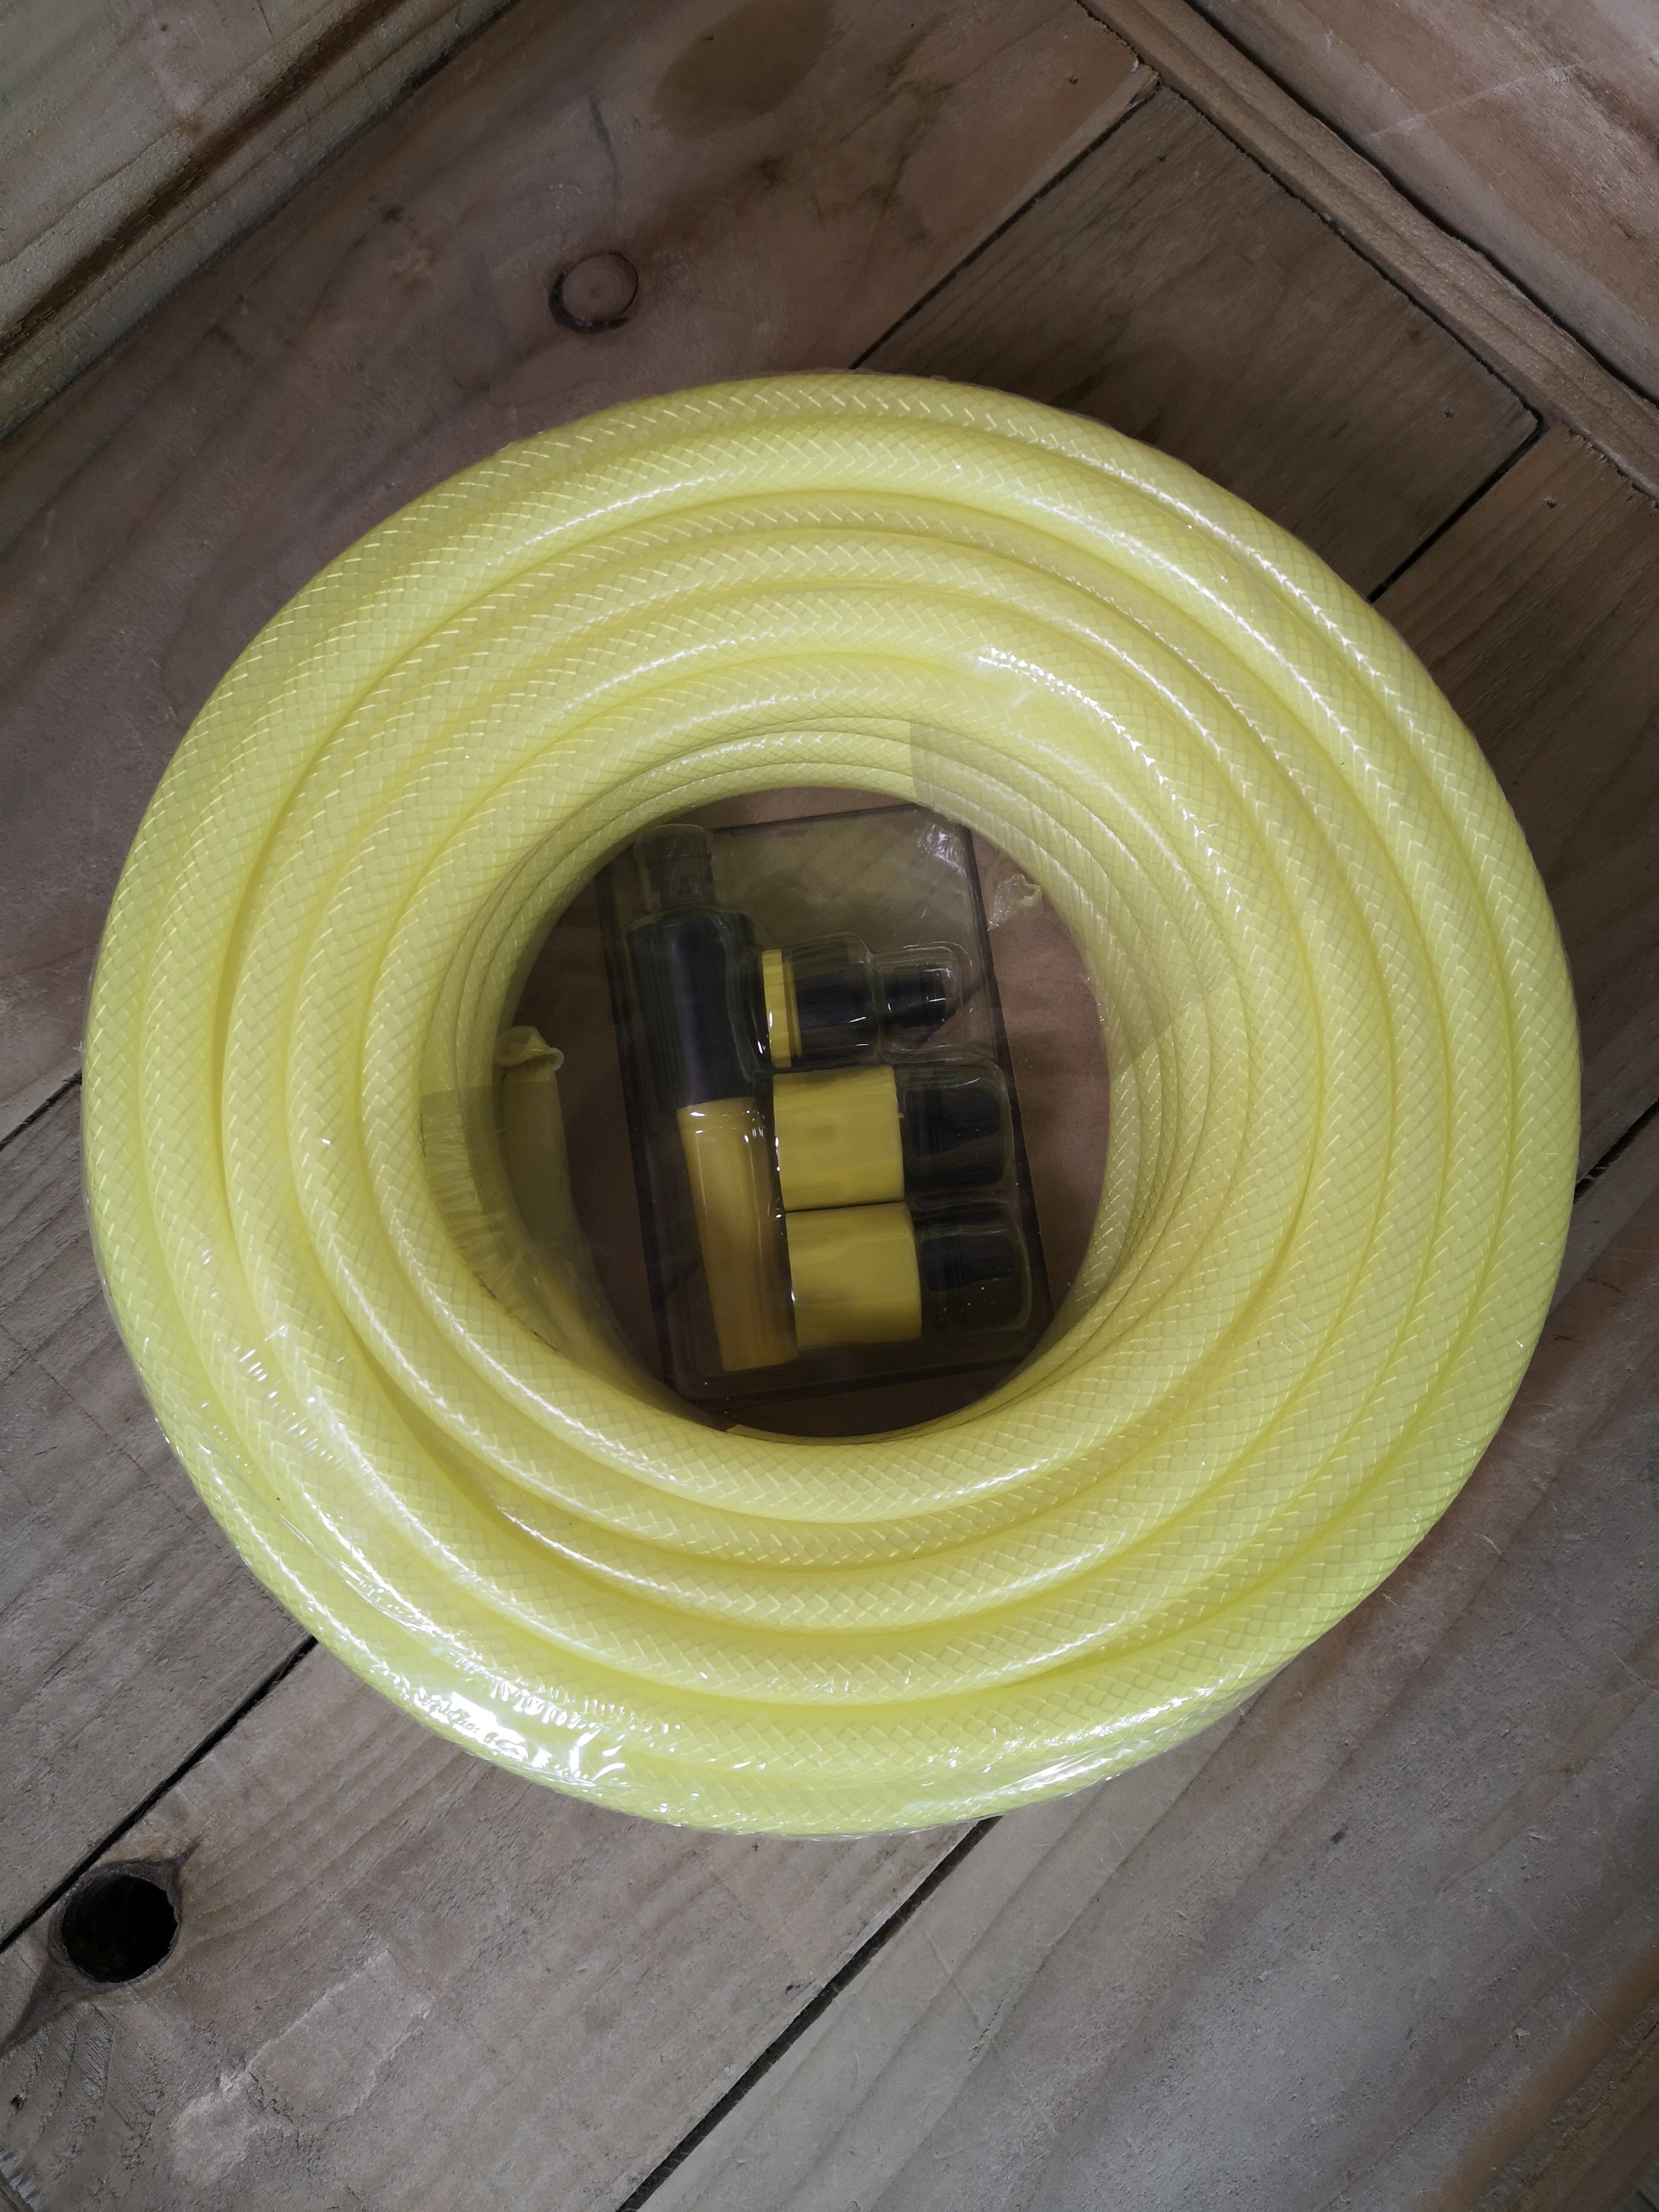 25m Kink Resistant Professional Garden Hose Pipe / Hosepipe in Yellow with Fittings